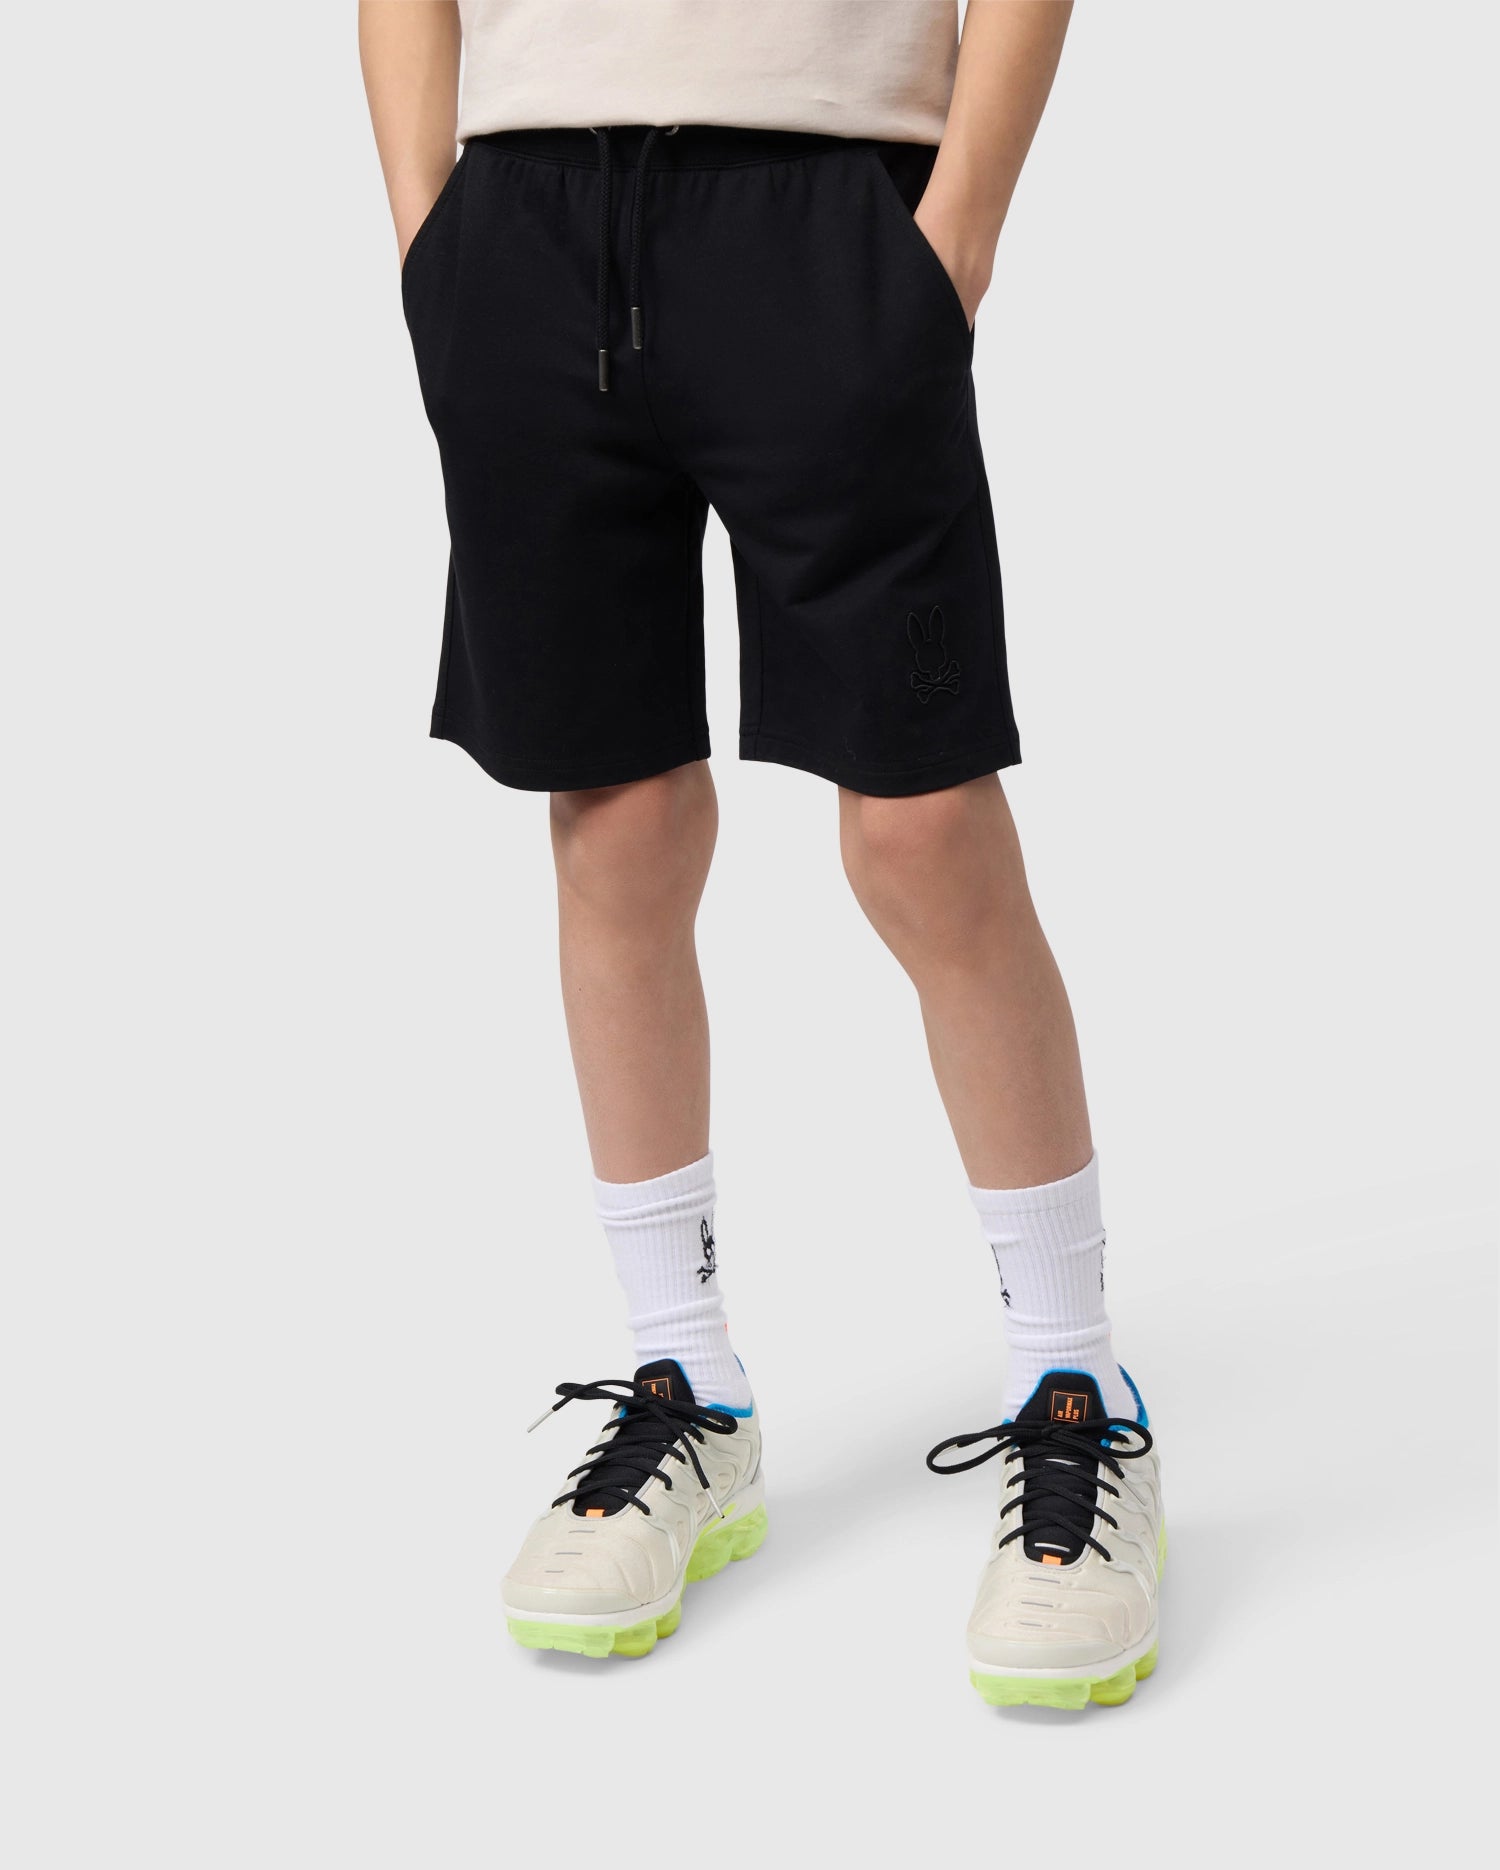 A person stands against a plain background, wearing black KIDS LIVINGSTON TERRY SWEATSHORT - B0R408B200 by Psycho Bunny, a beige top, white socks, and white sneakers with neon green soles. They have their hands in their pockets. The shorts, designed for comfort, feature a small emblem on the left leg.